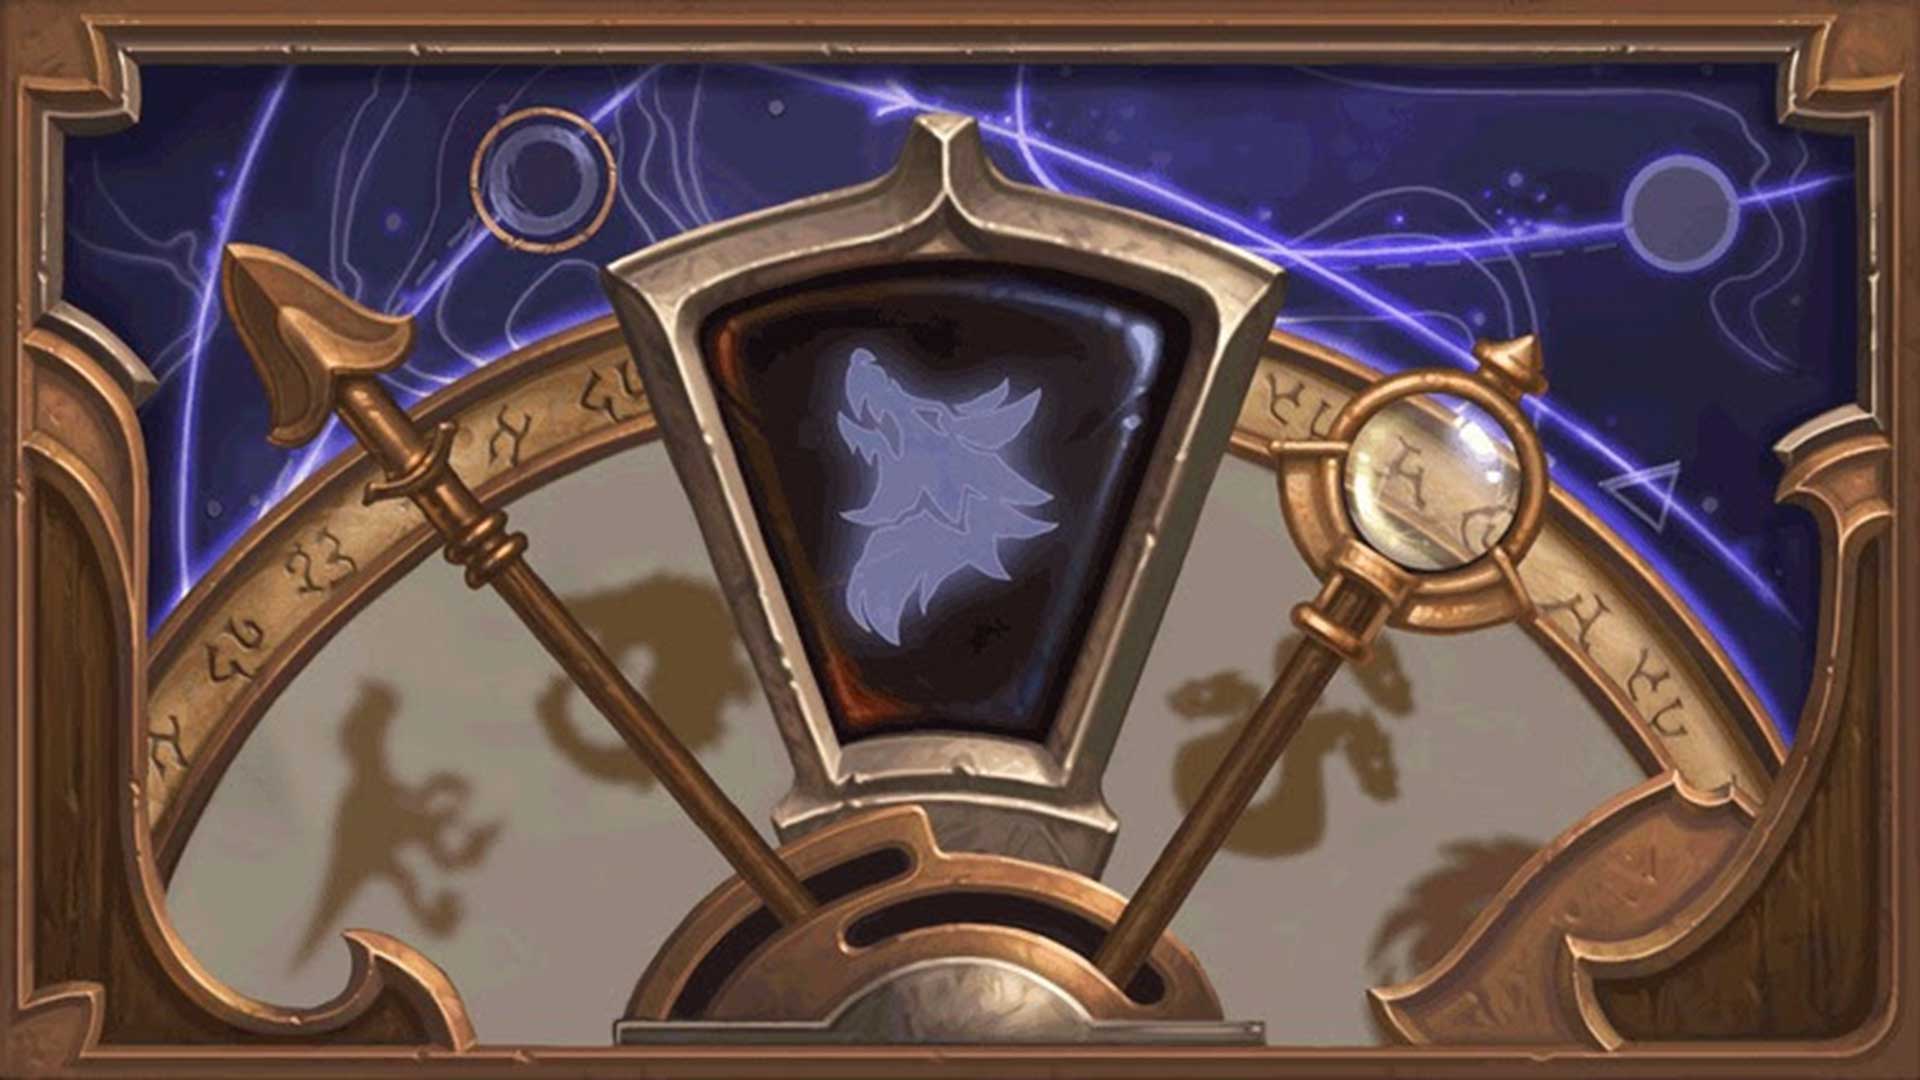 Hearthstone kicks off the Year of the Wolf with Essential